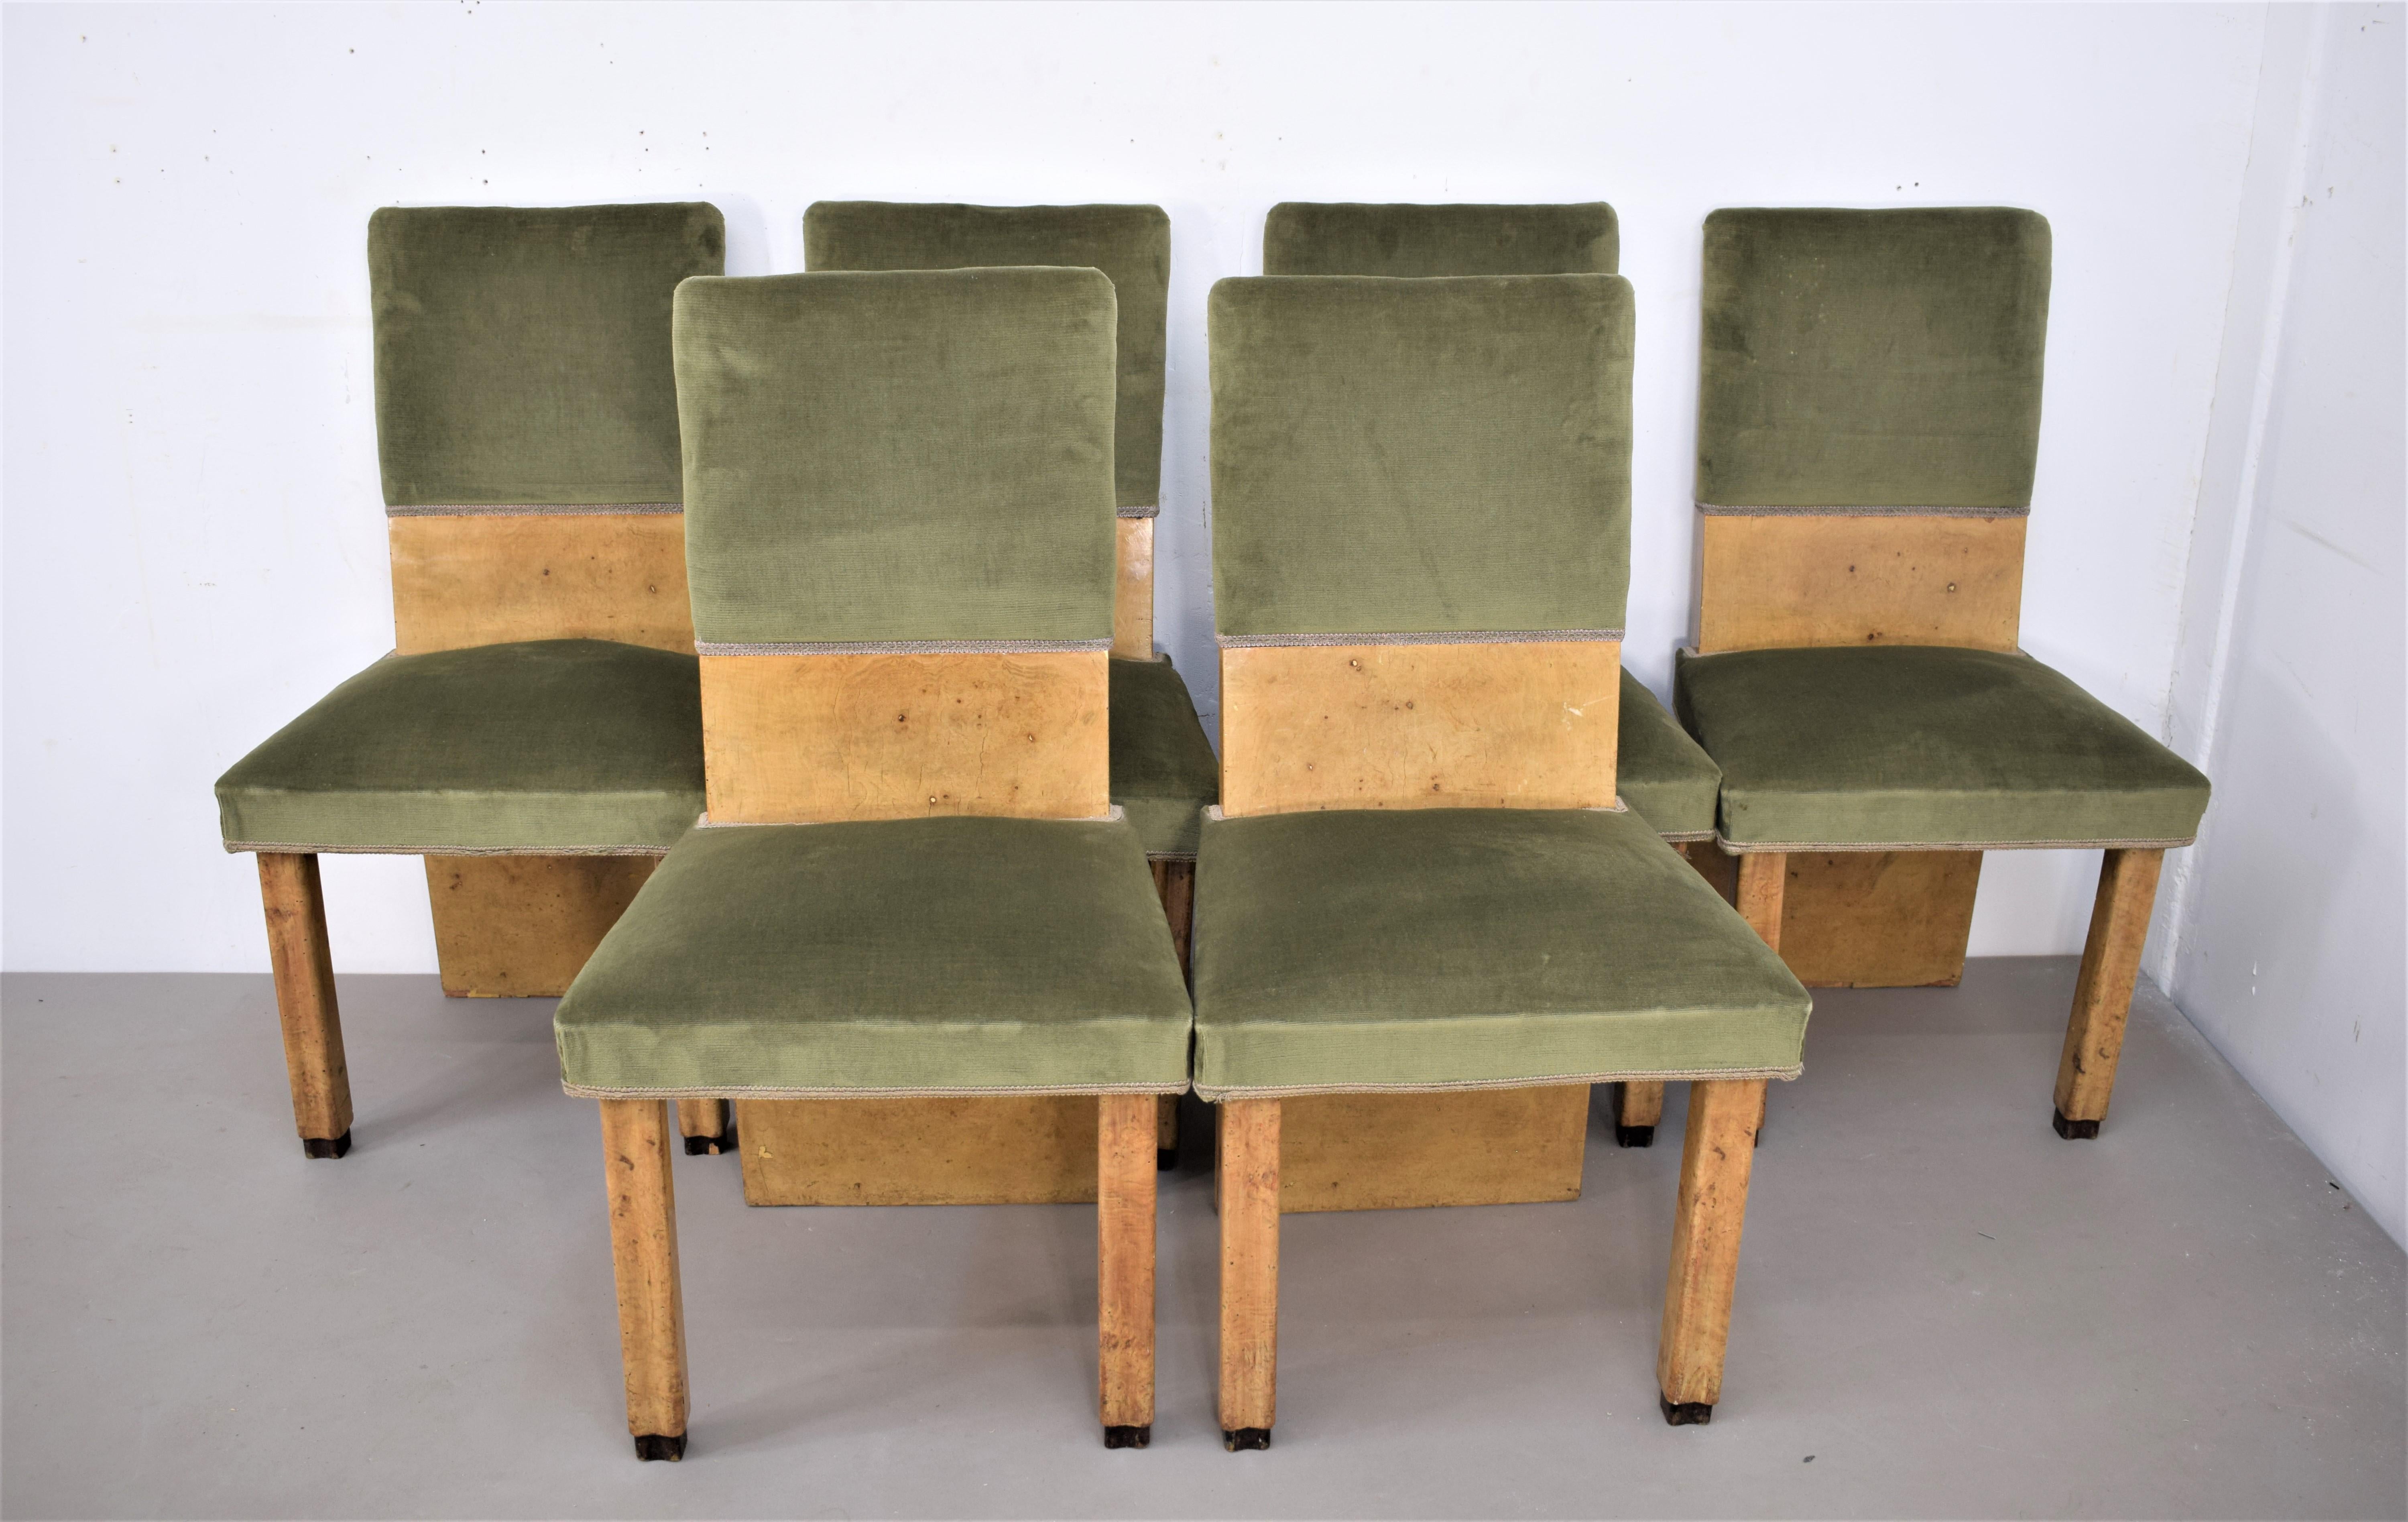 Set of six Italian chairs, 1930s.
Dimensions: H=95 cm; W=51 cm; D=46 cm; Height seat= 45 cm.